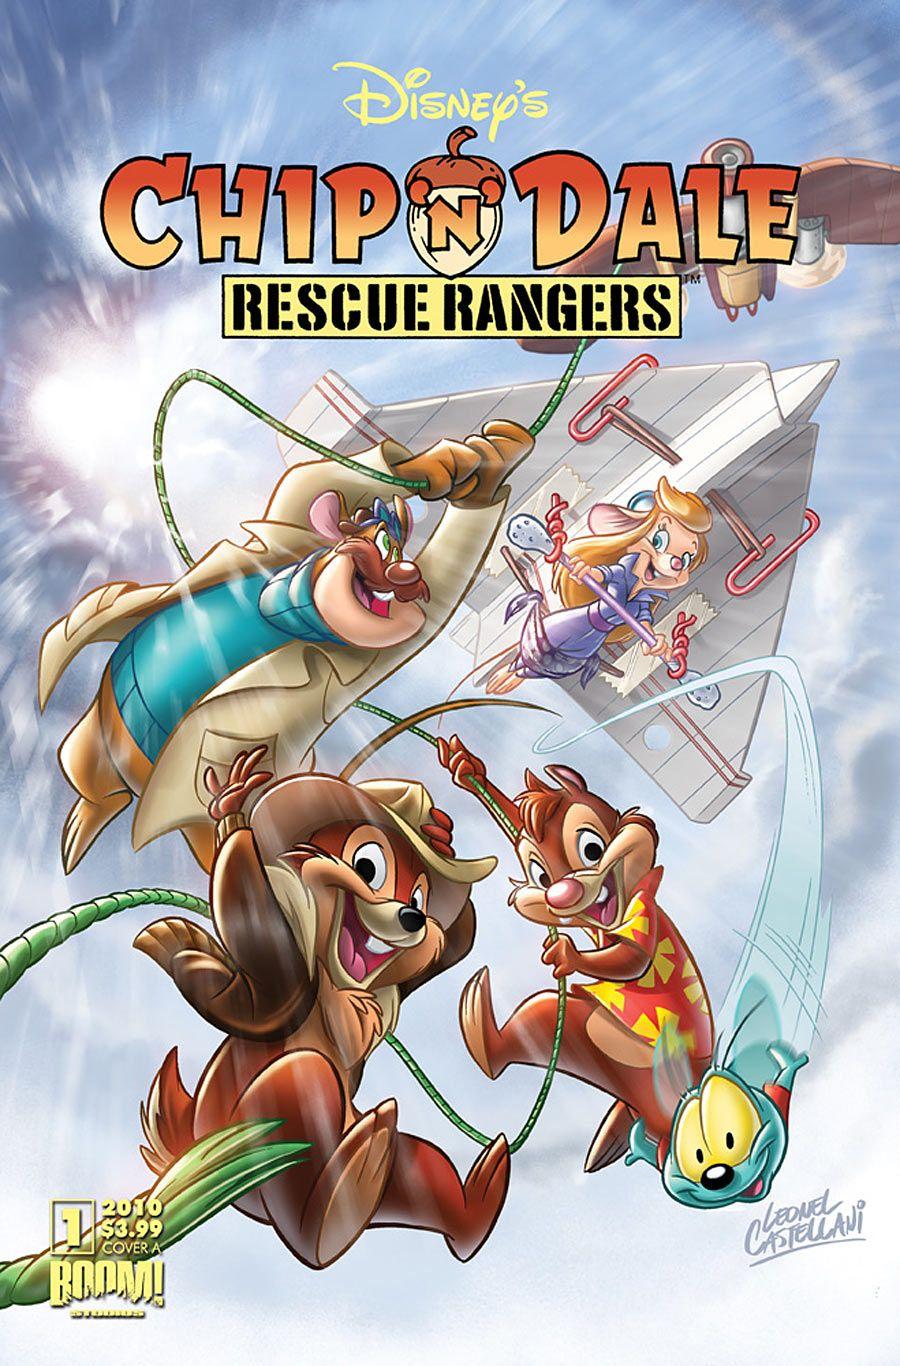 chip n dale dvd picture, chip n dale dvd image, chip n dale dvd